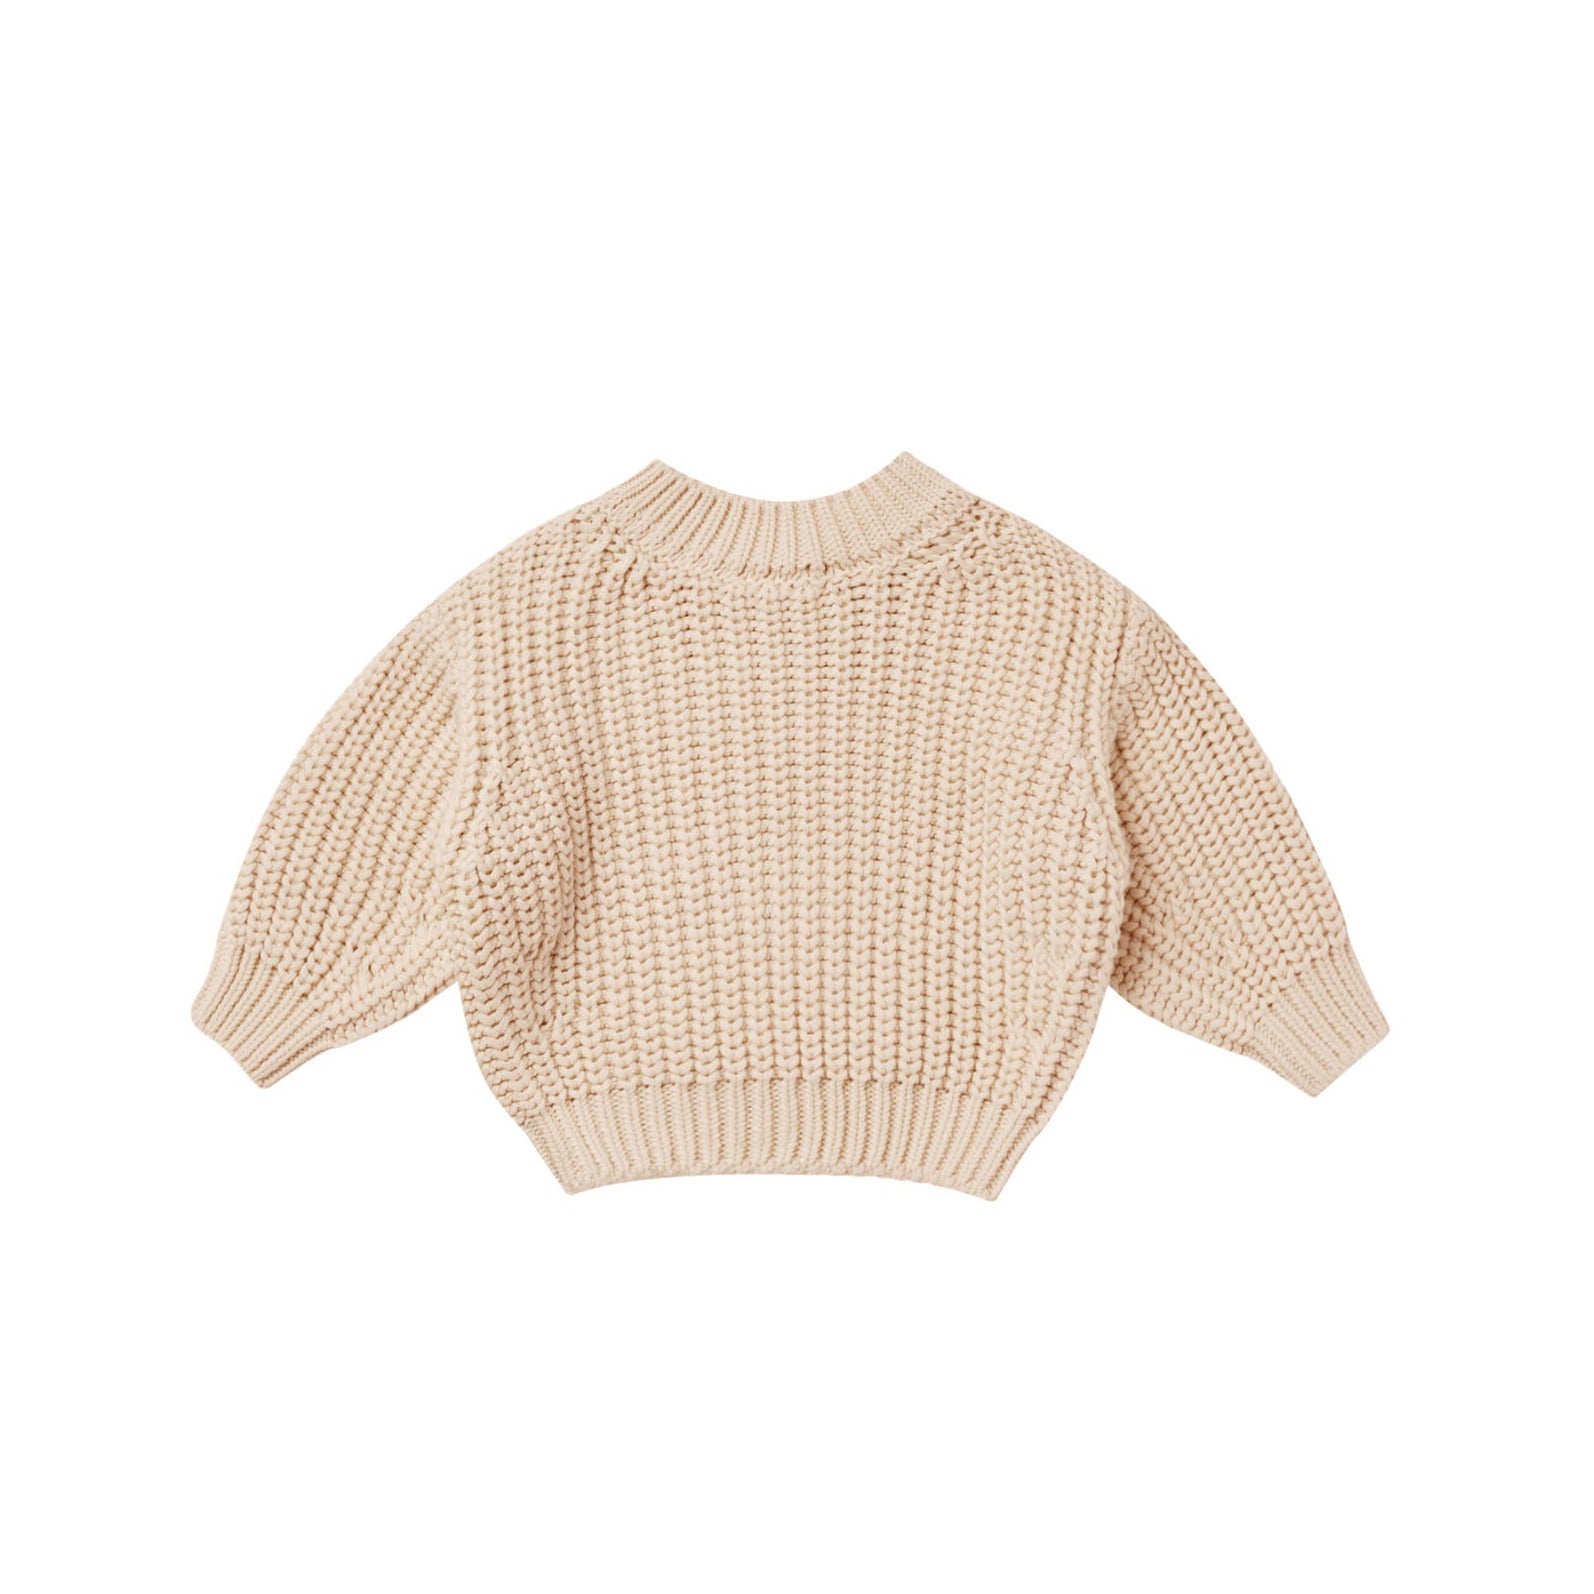 Shell Chunky Knit Sweater - Quincy Mae